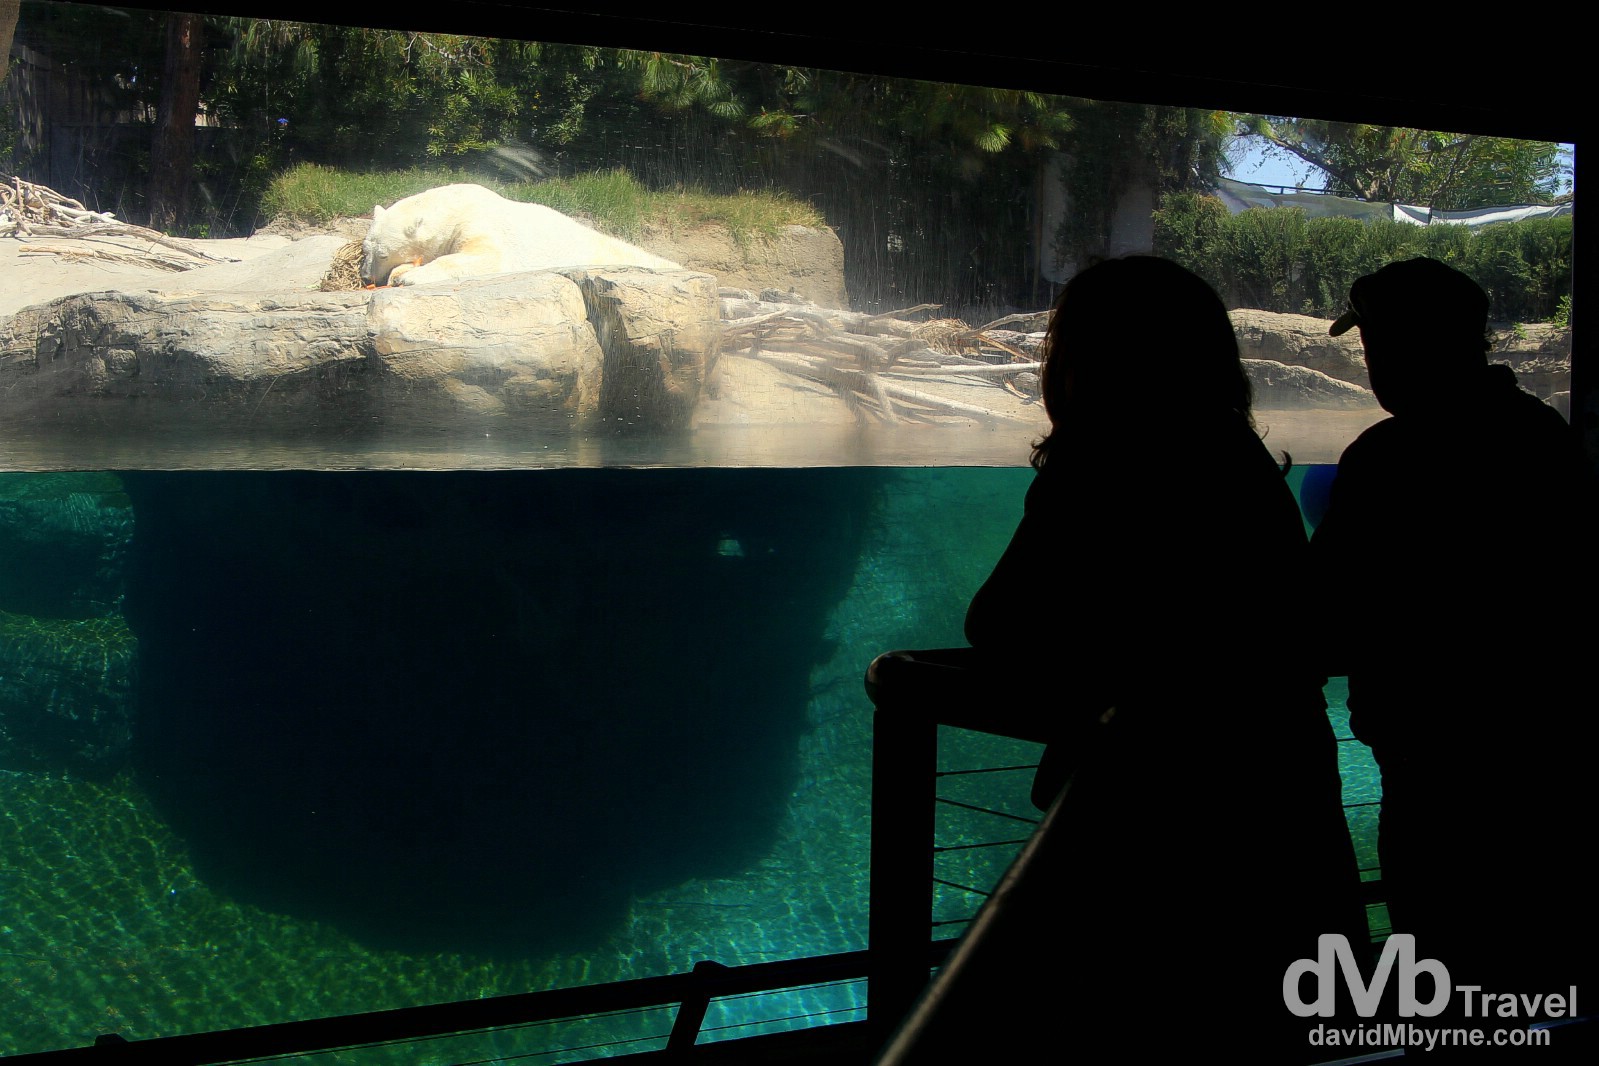 Viewing a polar bear in the Northern Frontier zone of San Diego Zoo. San Diego, California, USA. April 17th 2013.